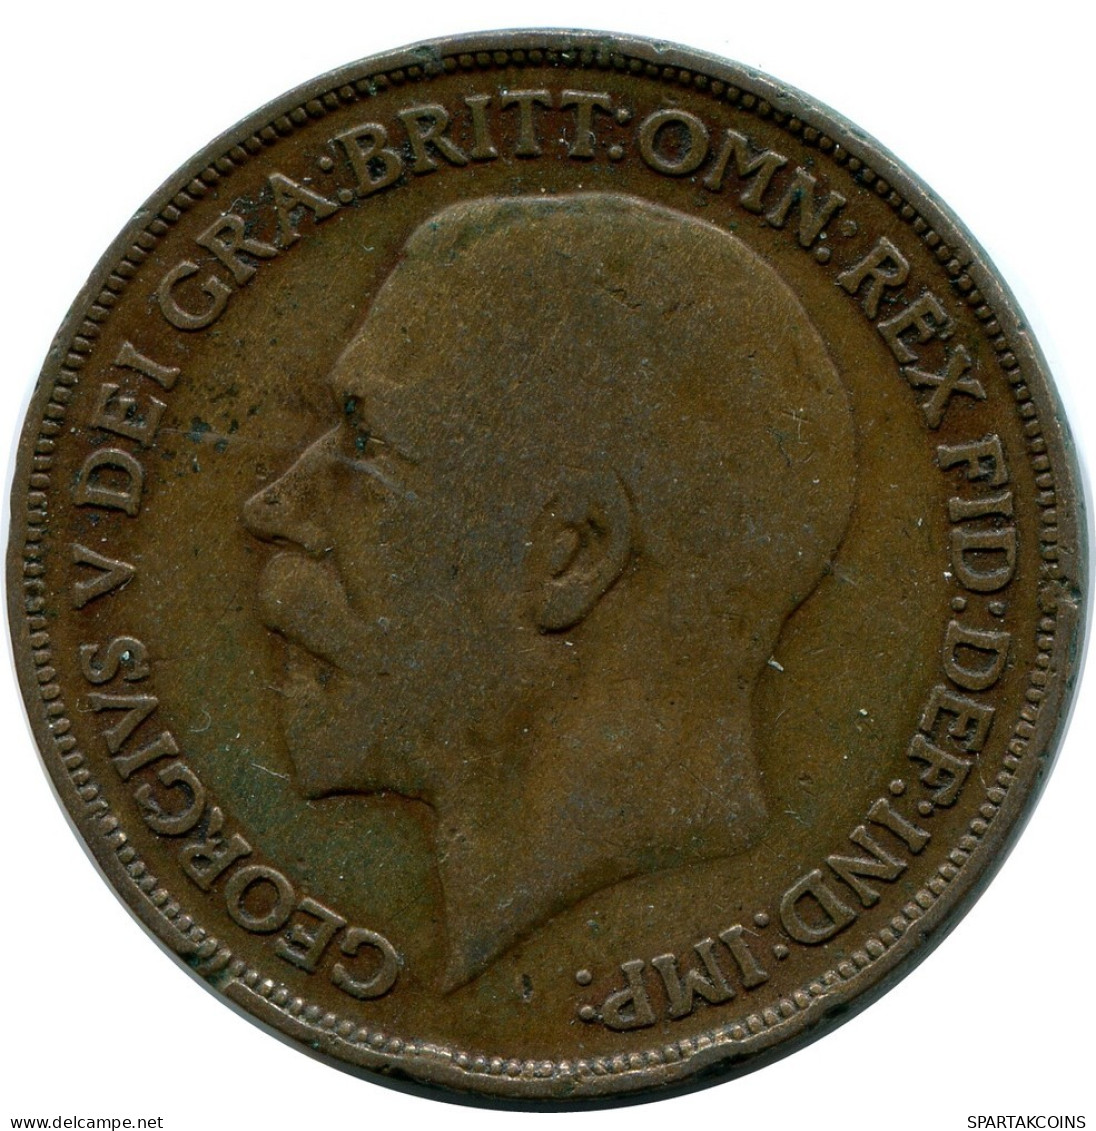 PENNY 1915 UK GREAT BRITAIN Coin #BB009.U.A - D. 1 Penny